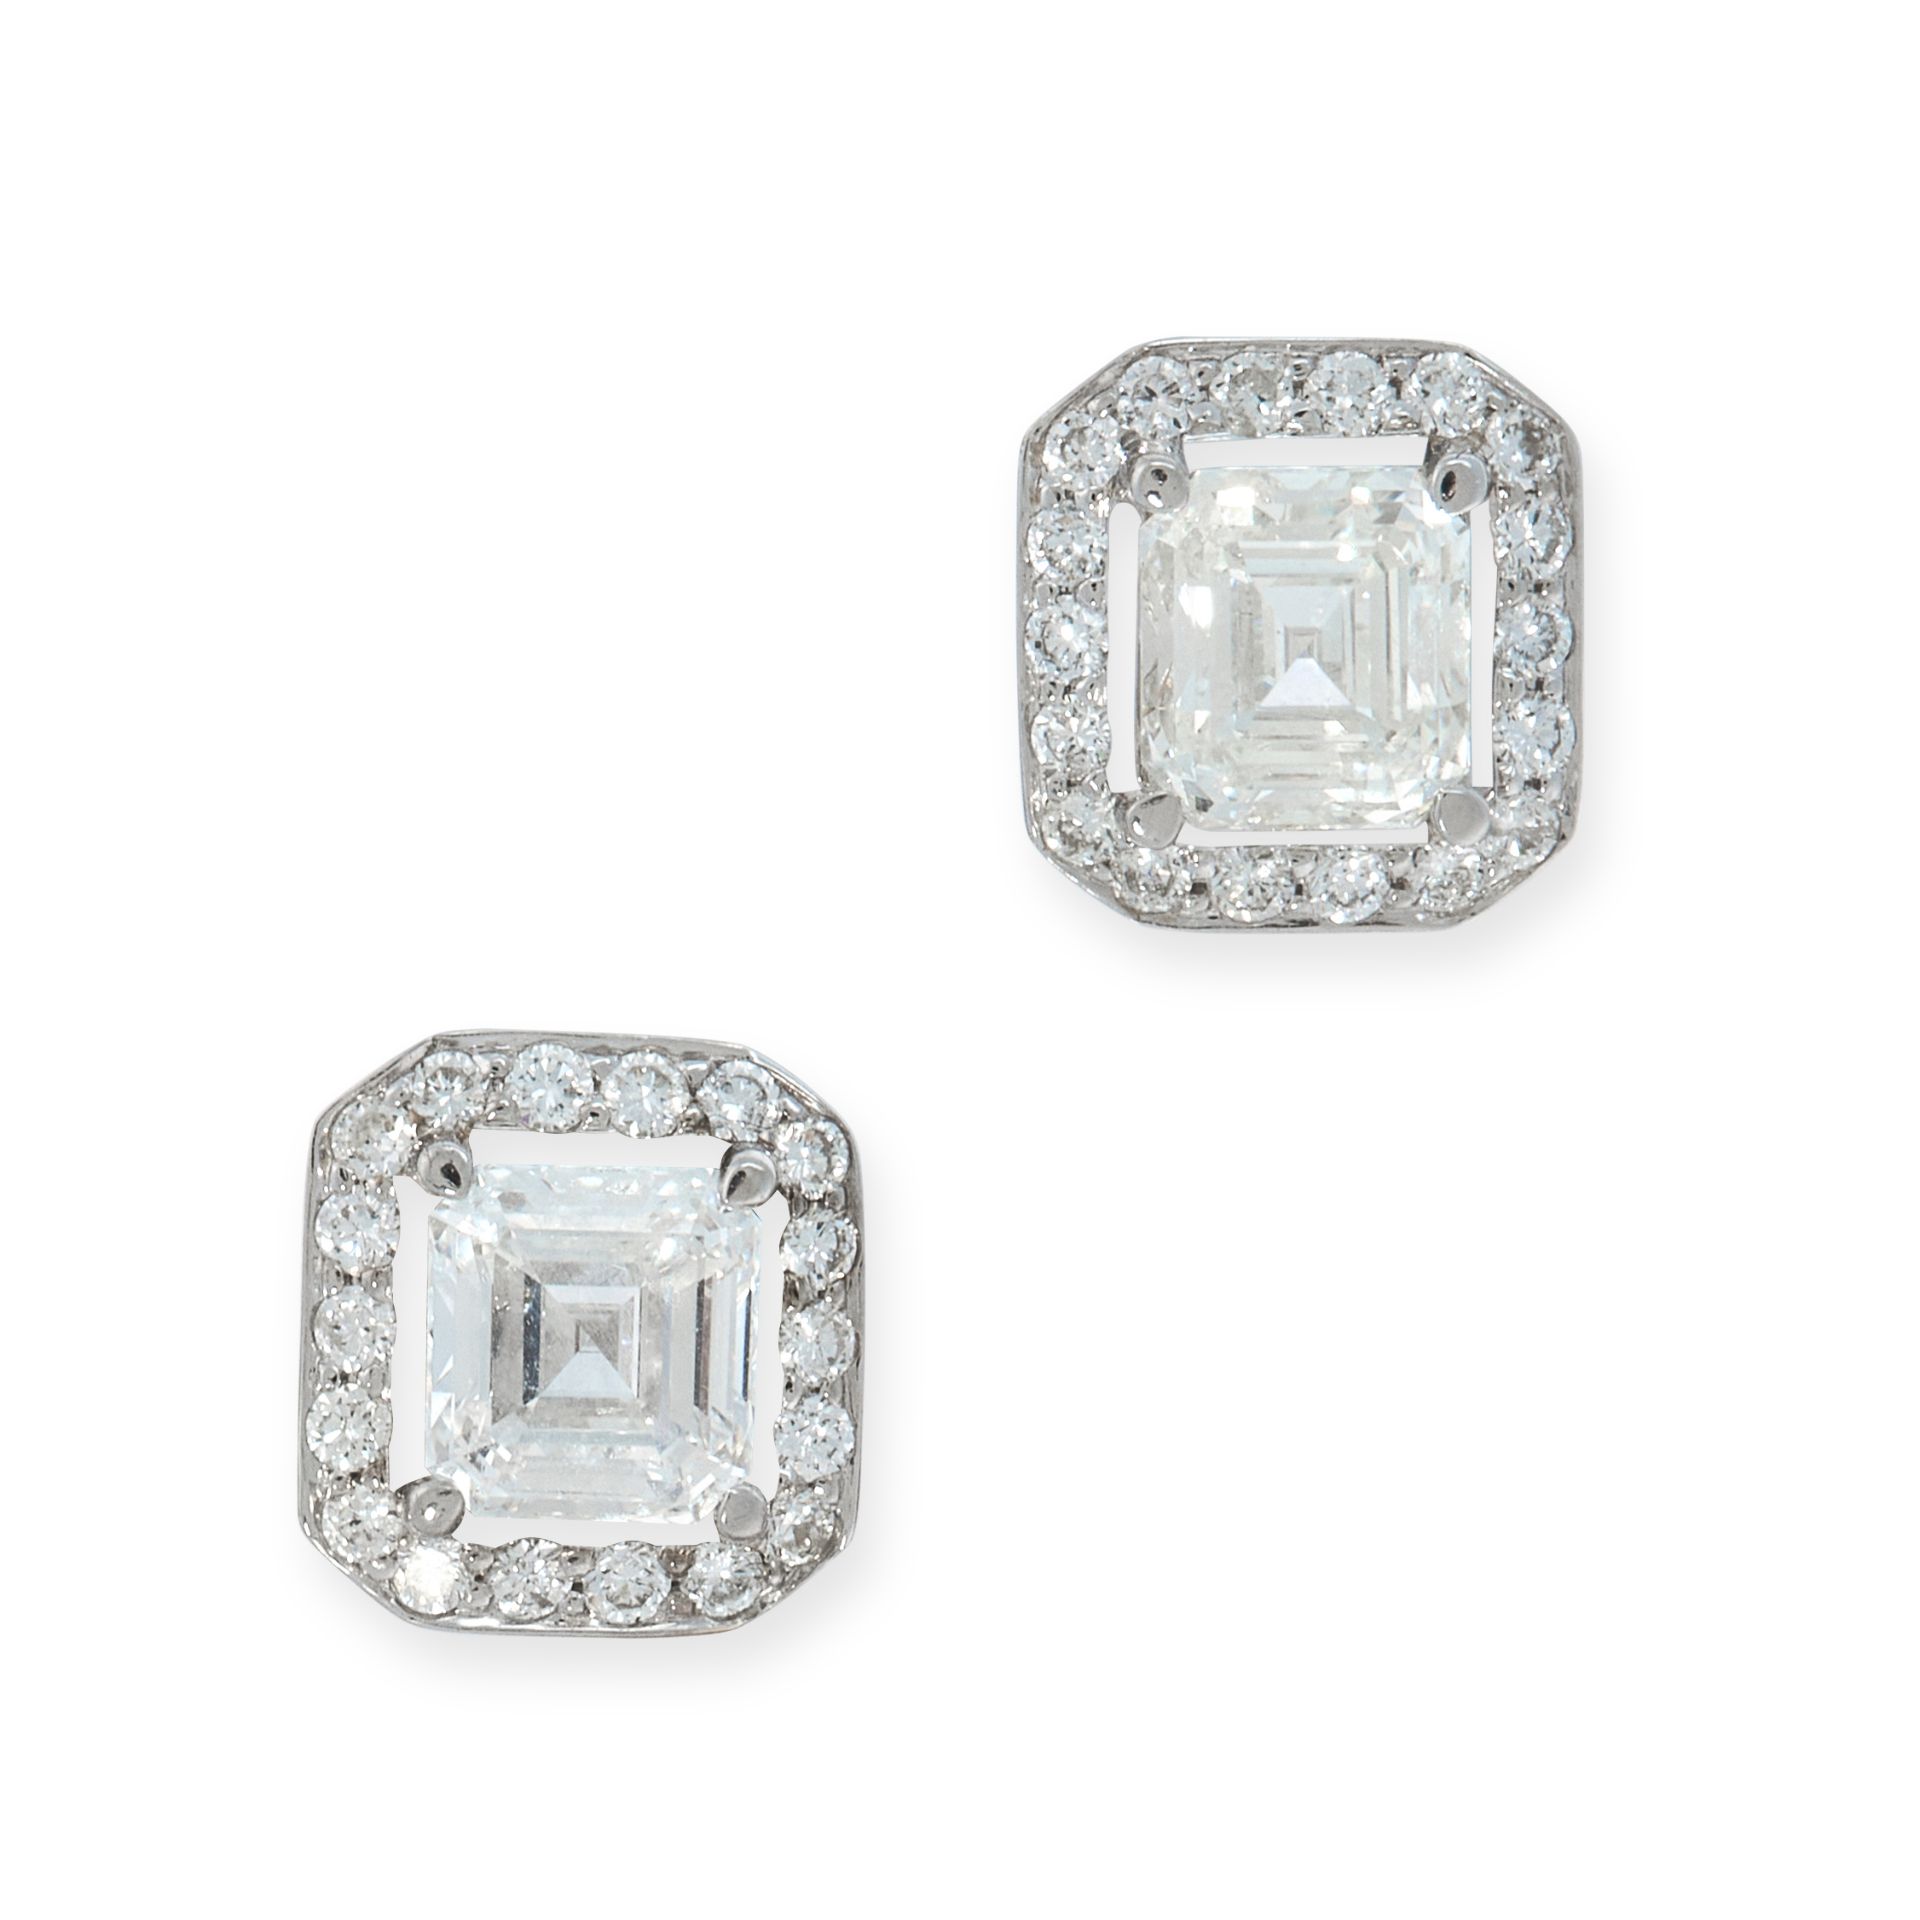 A PAIR OF DIAMOND CLUSTER STUD EARRINGS in 18ct white gold, each set with an asscher cut diamond